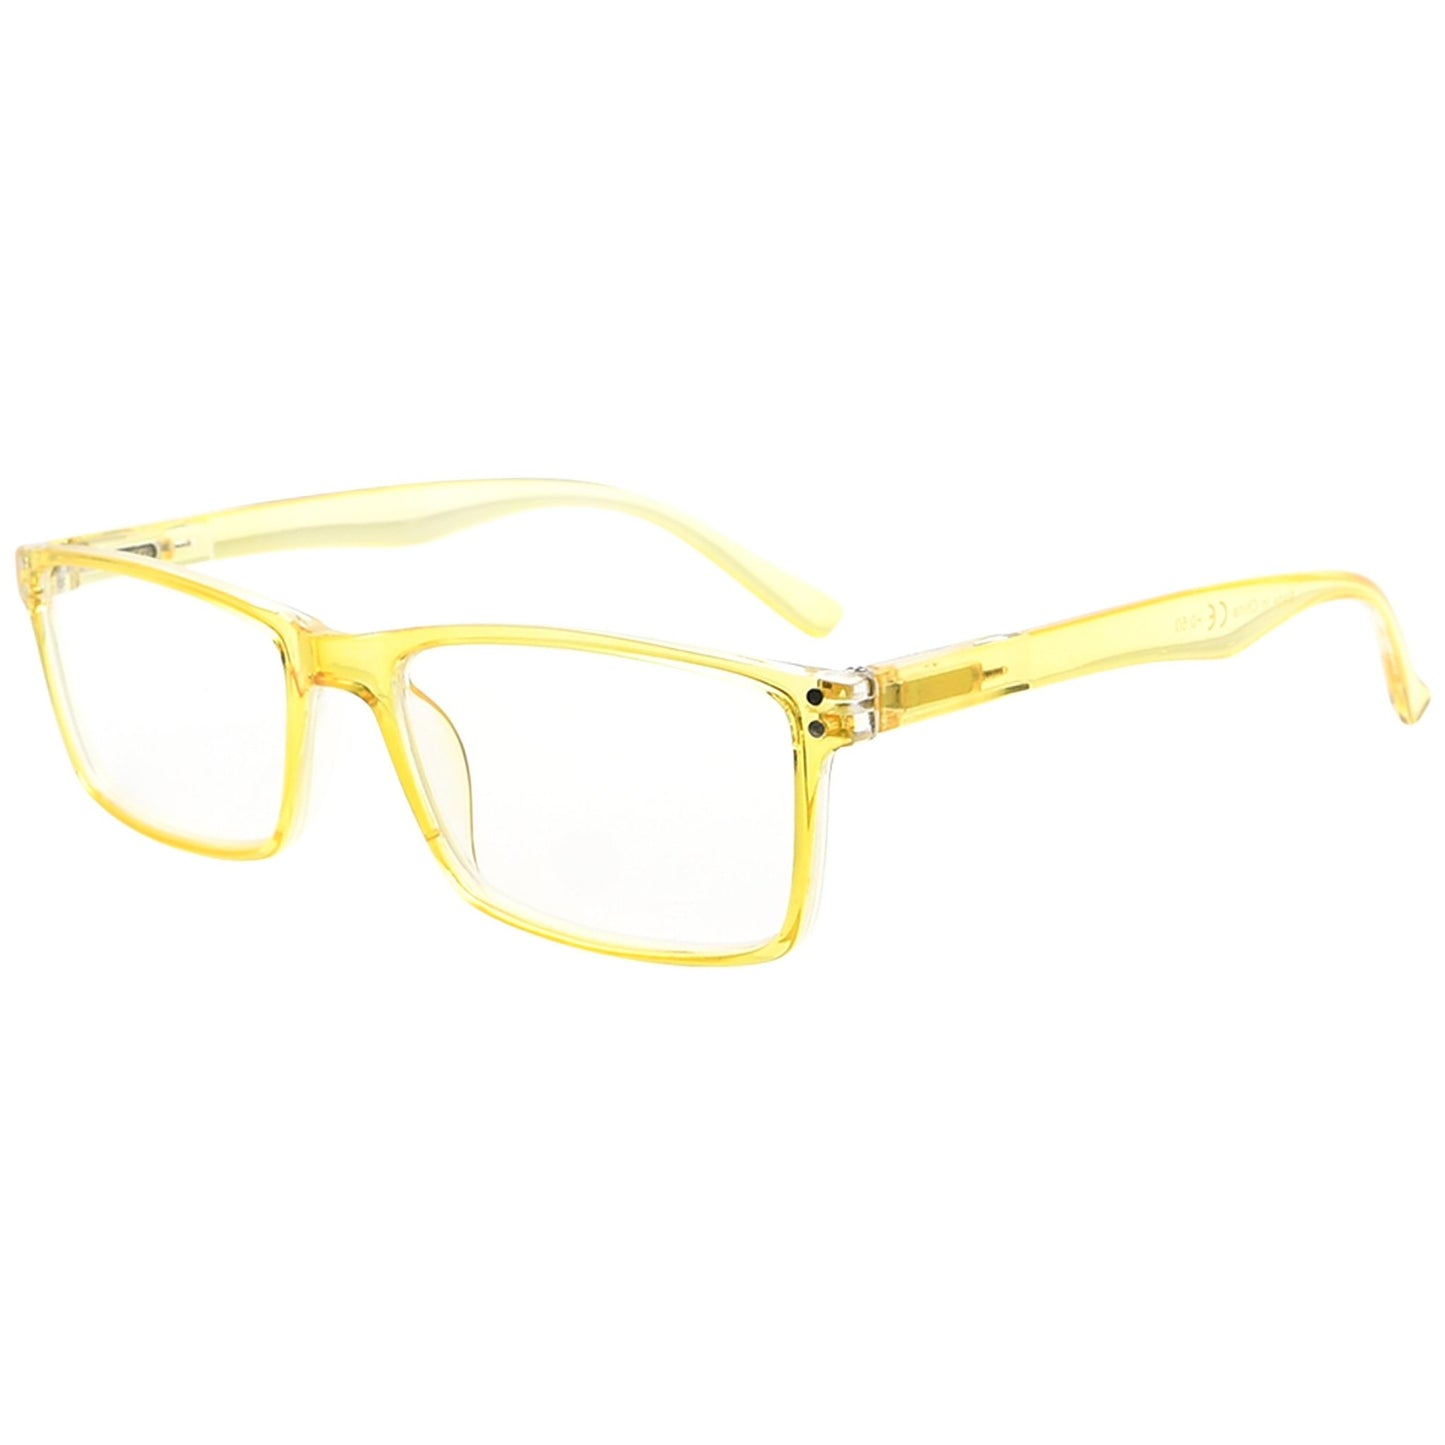 Vintage Stylish Reading Glasses Yellow R802-A